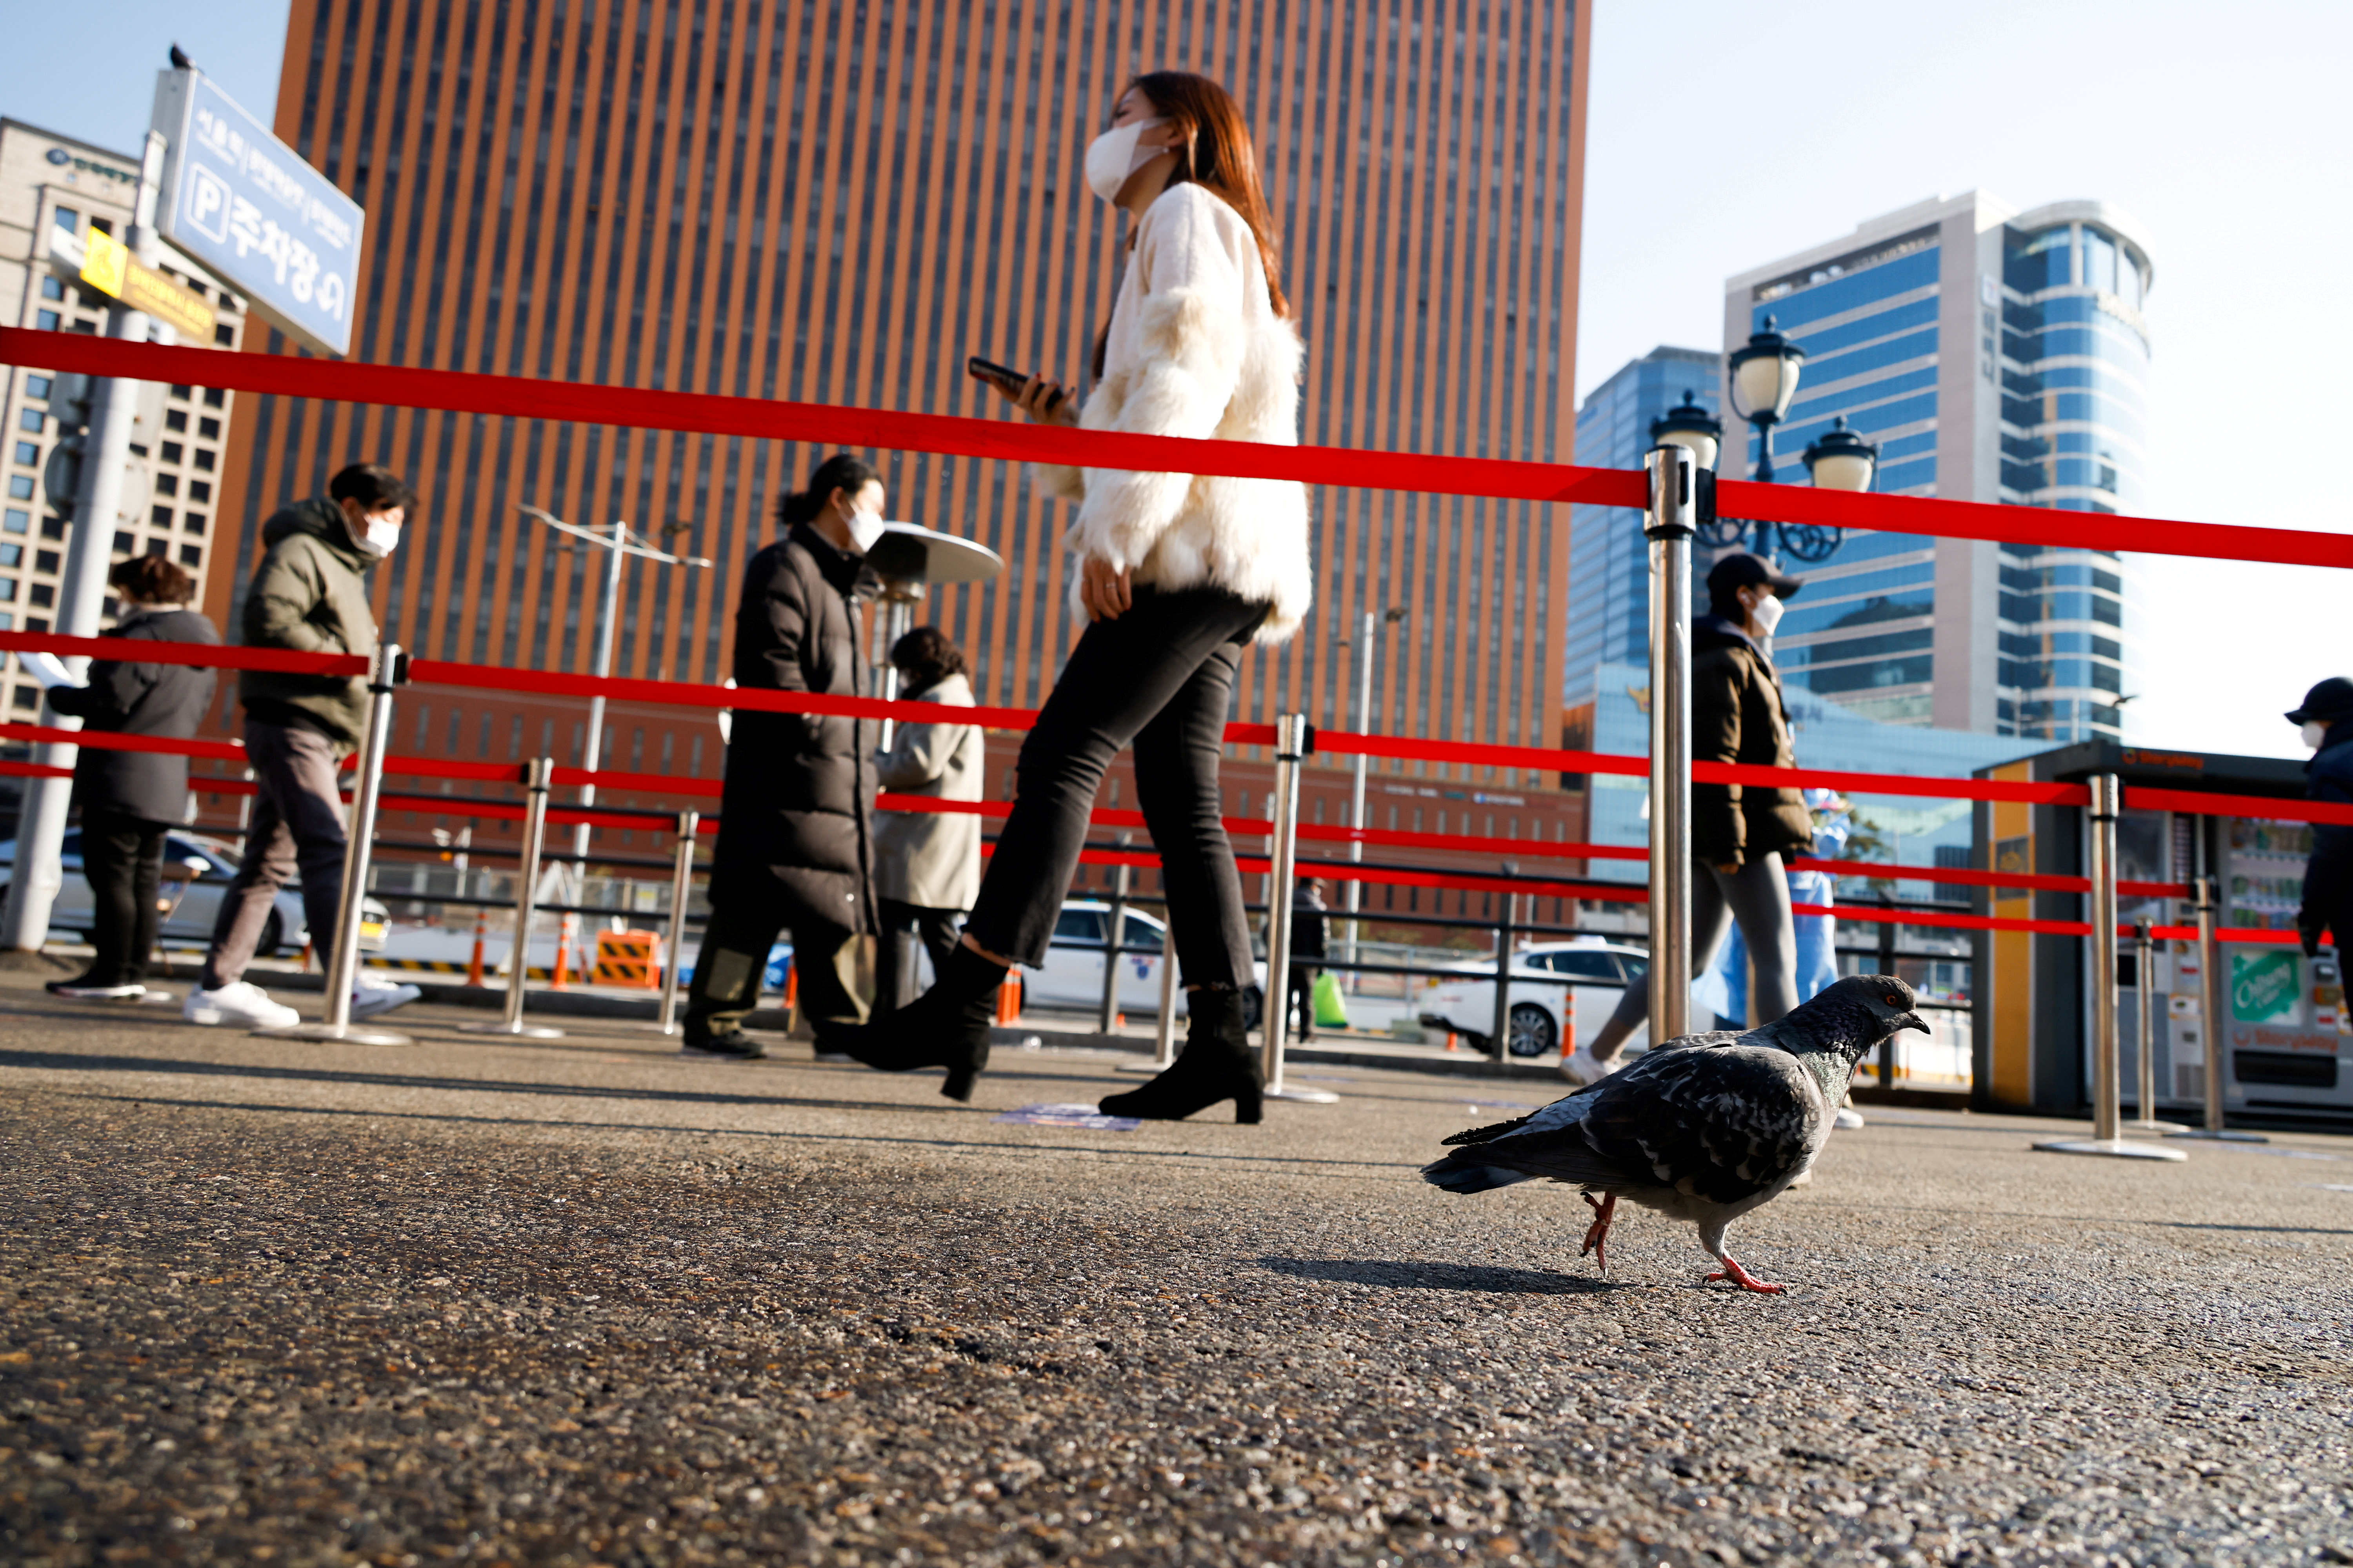 A pigeon walks past people who wait in a line to undergo coronavirus disease (COVID-19) tests at a coronavirus testing site which is temporarily set up in front of a railway station in Seoul